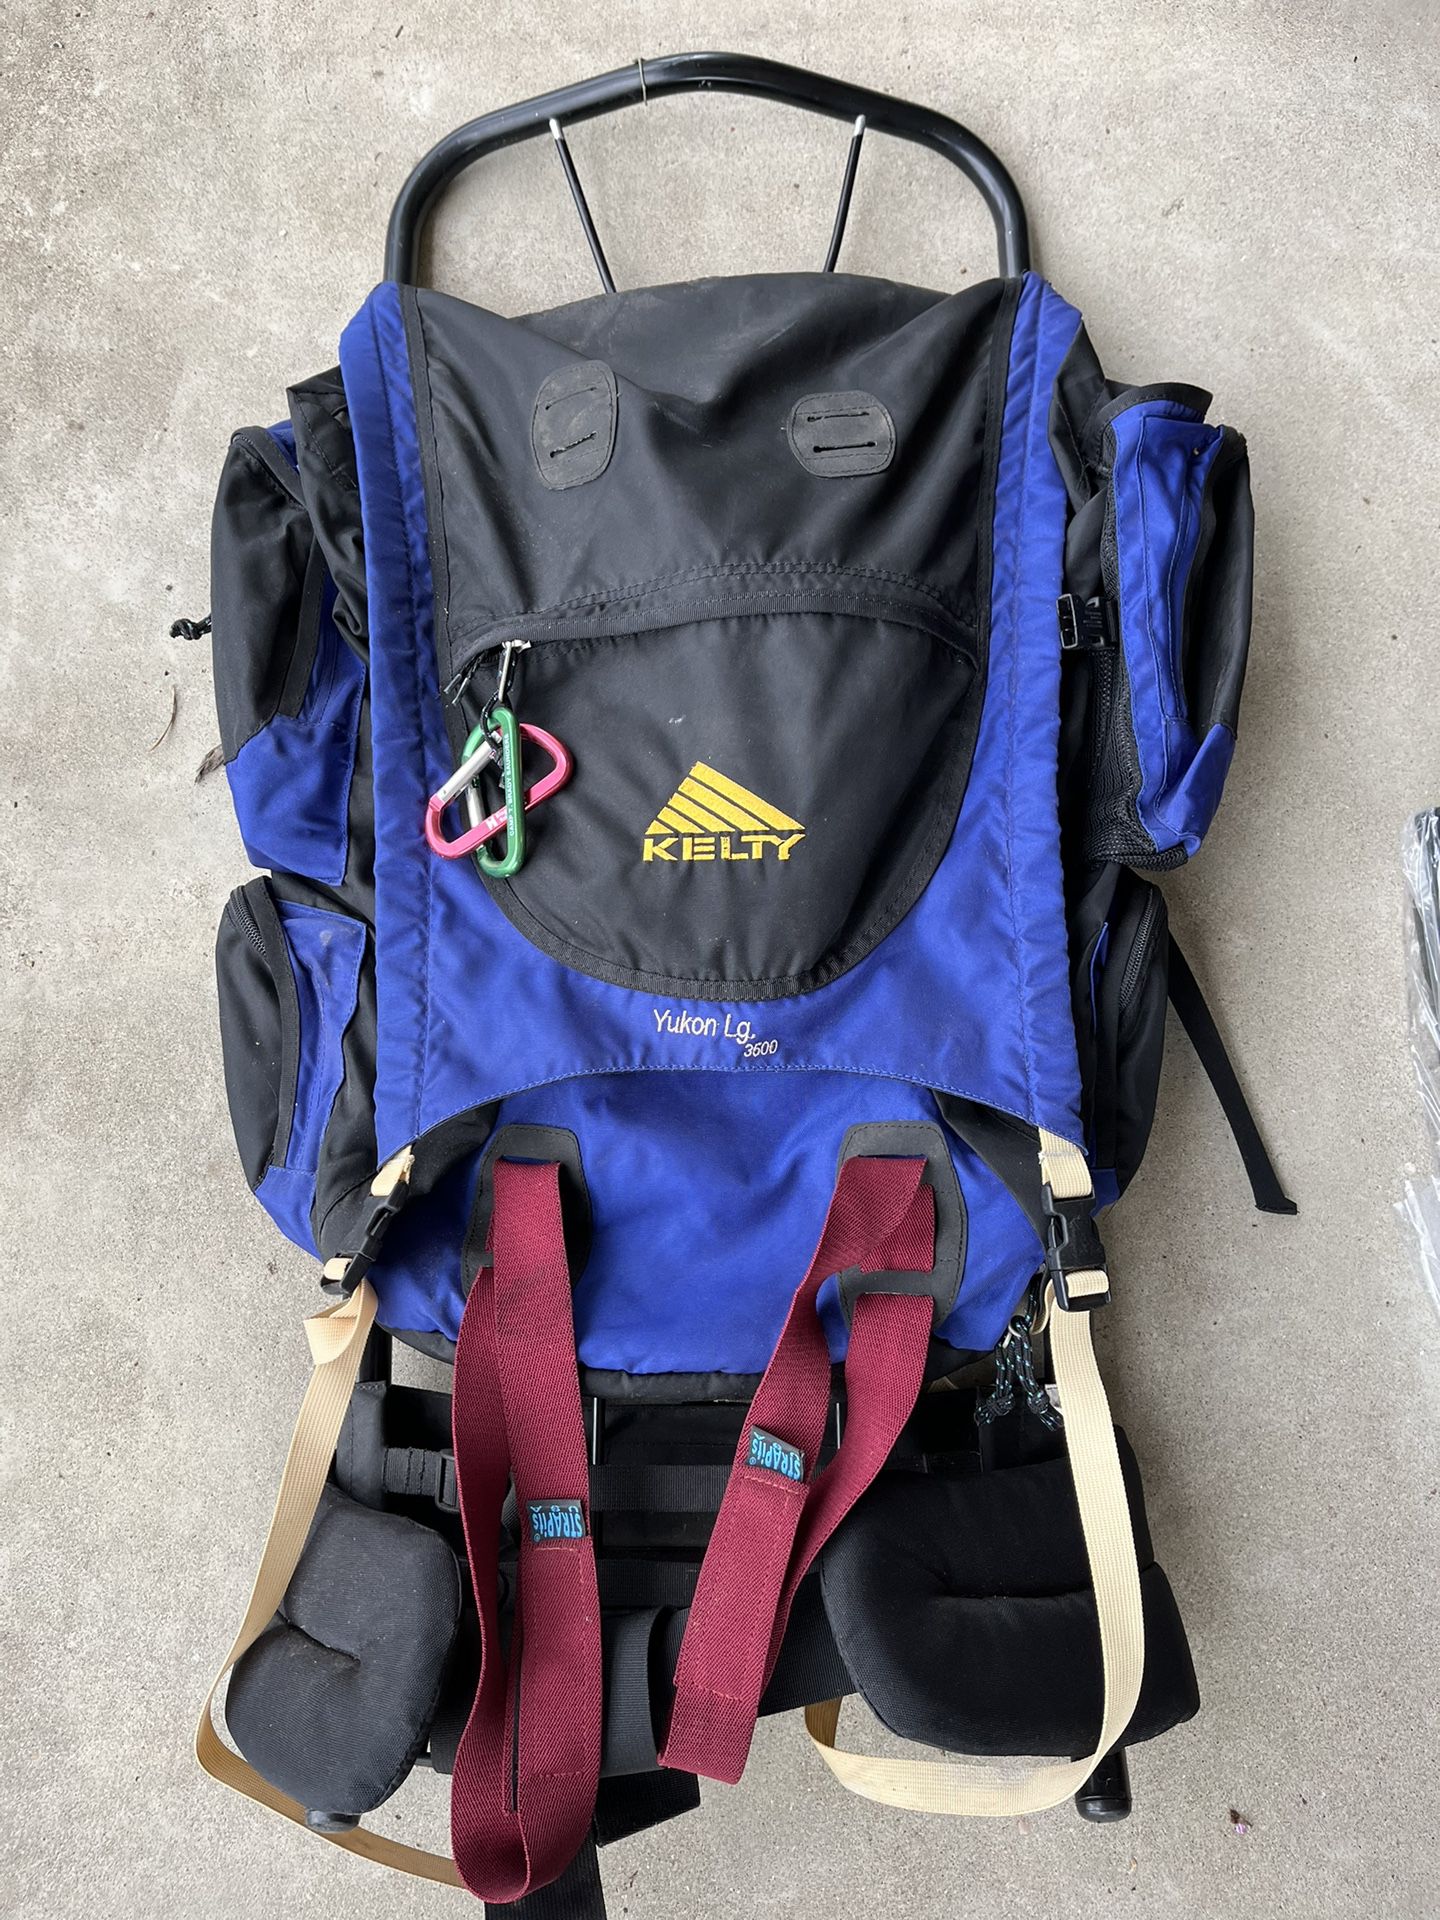 Kelty lg 3600 Hiking Backpack With Colombia Day Pack